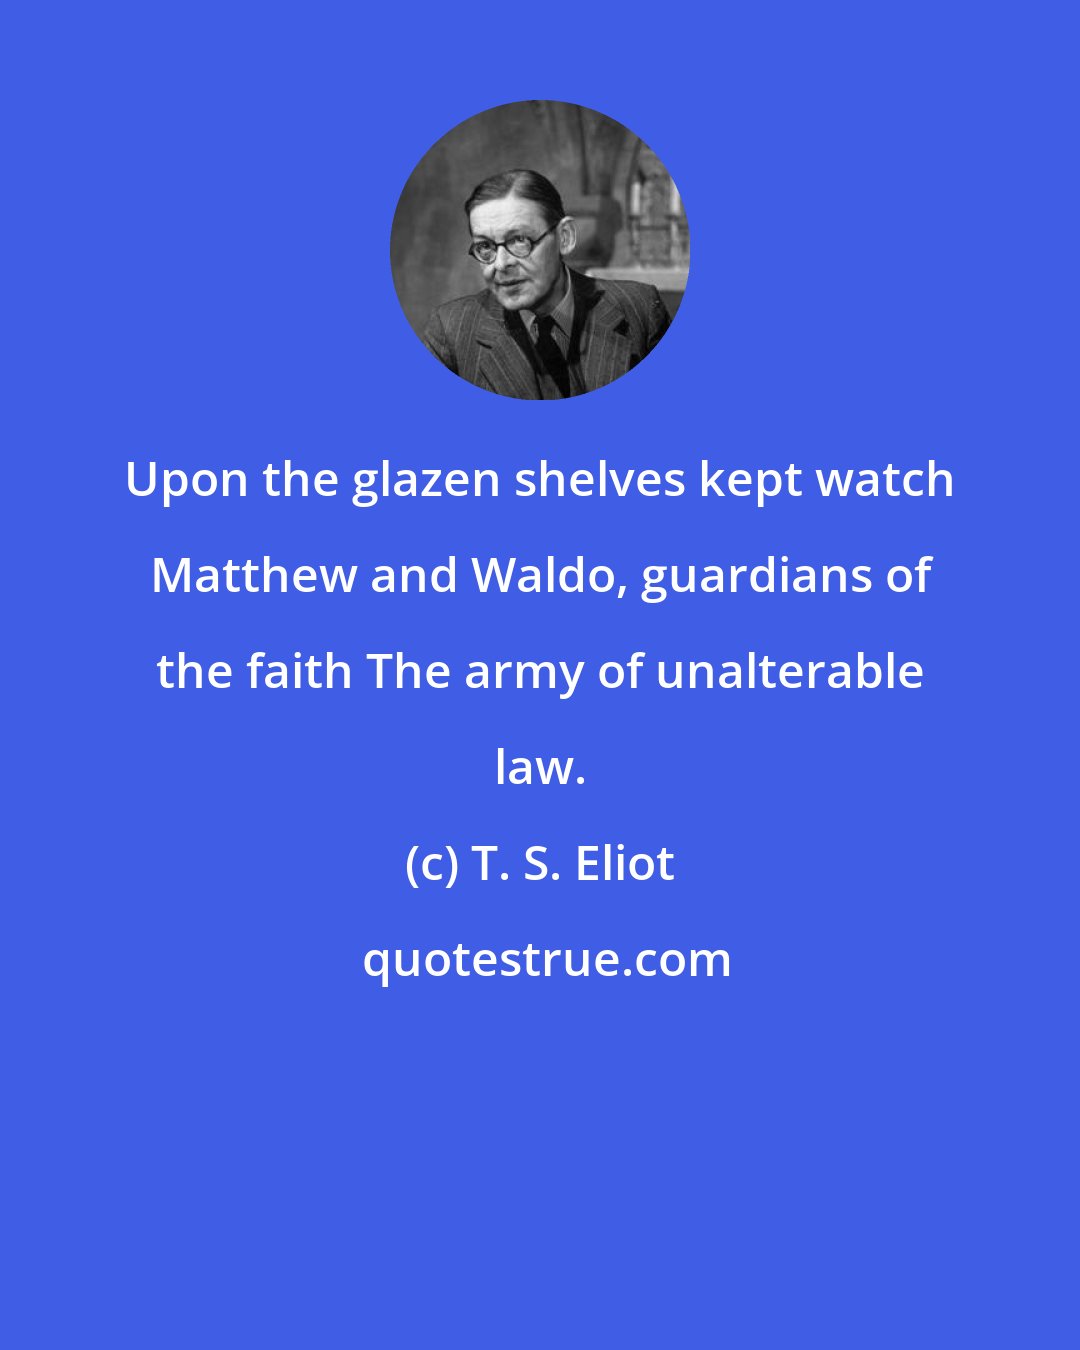 T. S. Eliot: Upon the glazen shelves kept watch Matthew and Waldo, guardians of the faith The army of unalterable law.